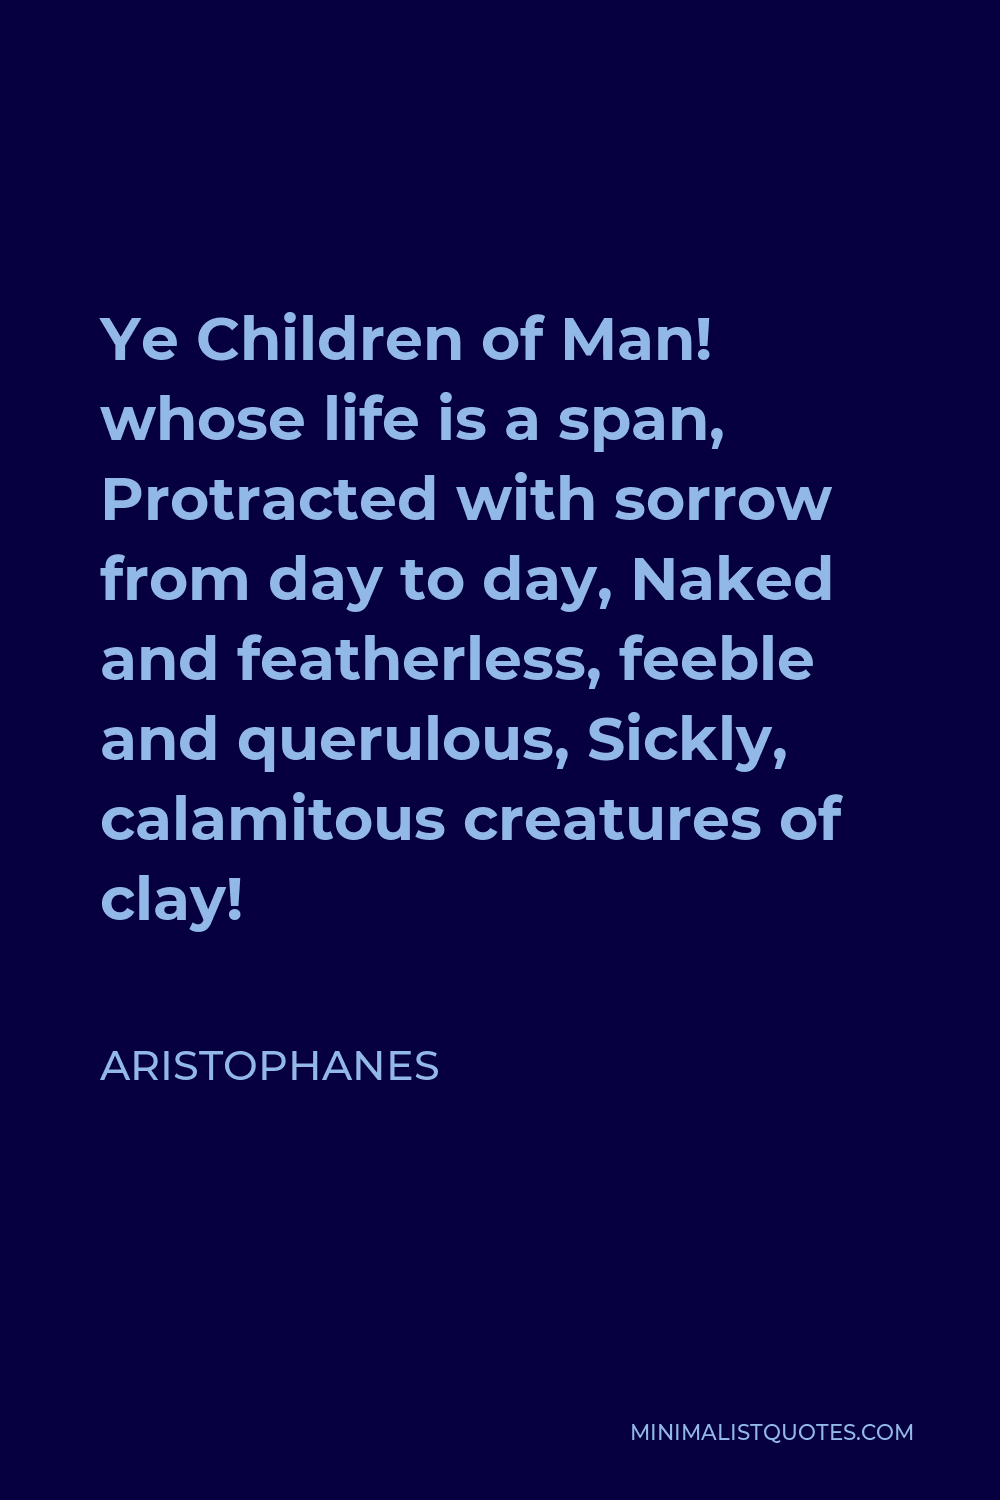 Aristophanes Quote - Ye Children of Man! whose life is a span, Protracted with sorrow from day to day, Naked and featherless, feeble and querulous, Sickly, calamitous creatures of clay!